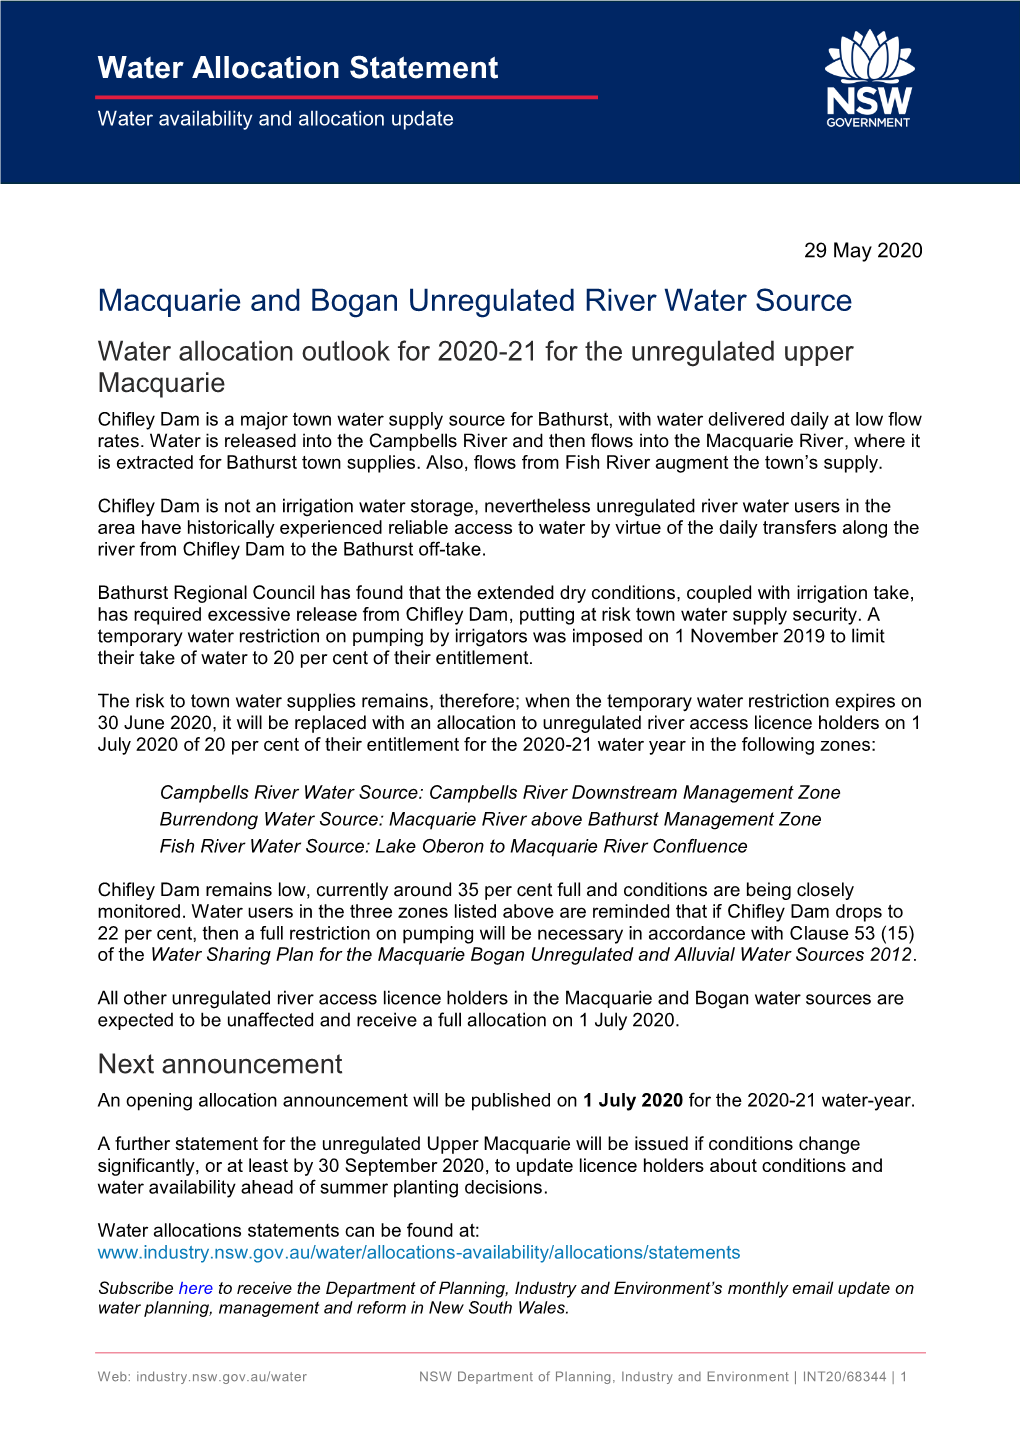 Macquarie and Bogan Unregulated River Water Source